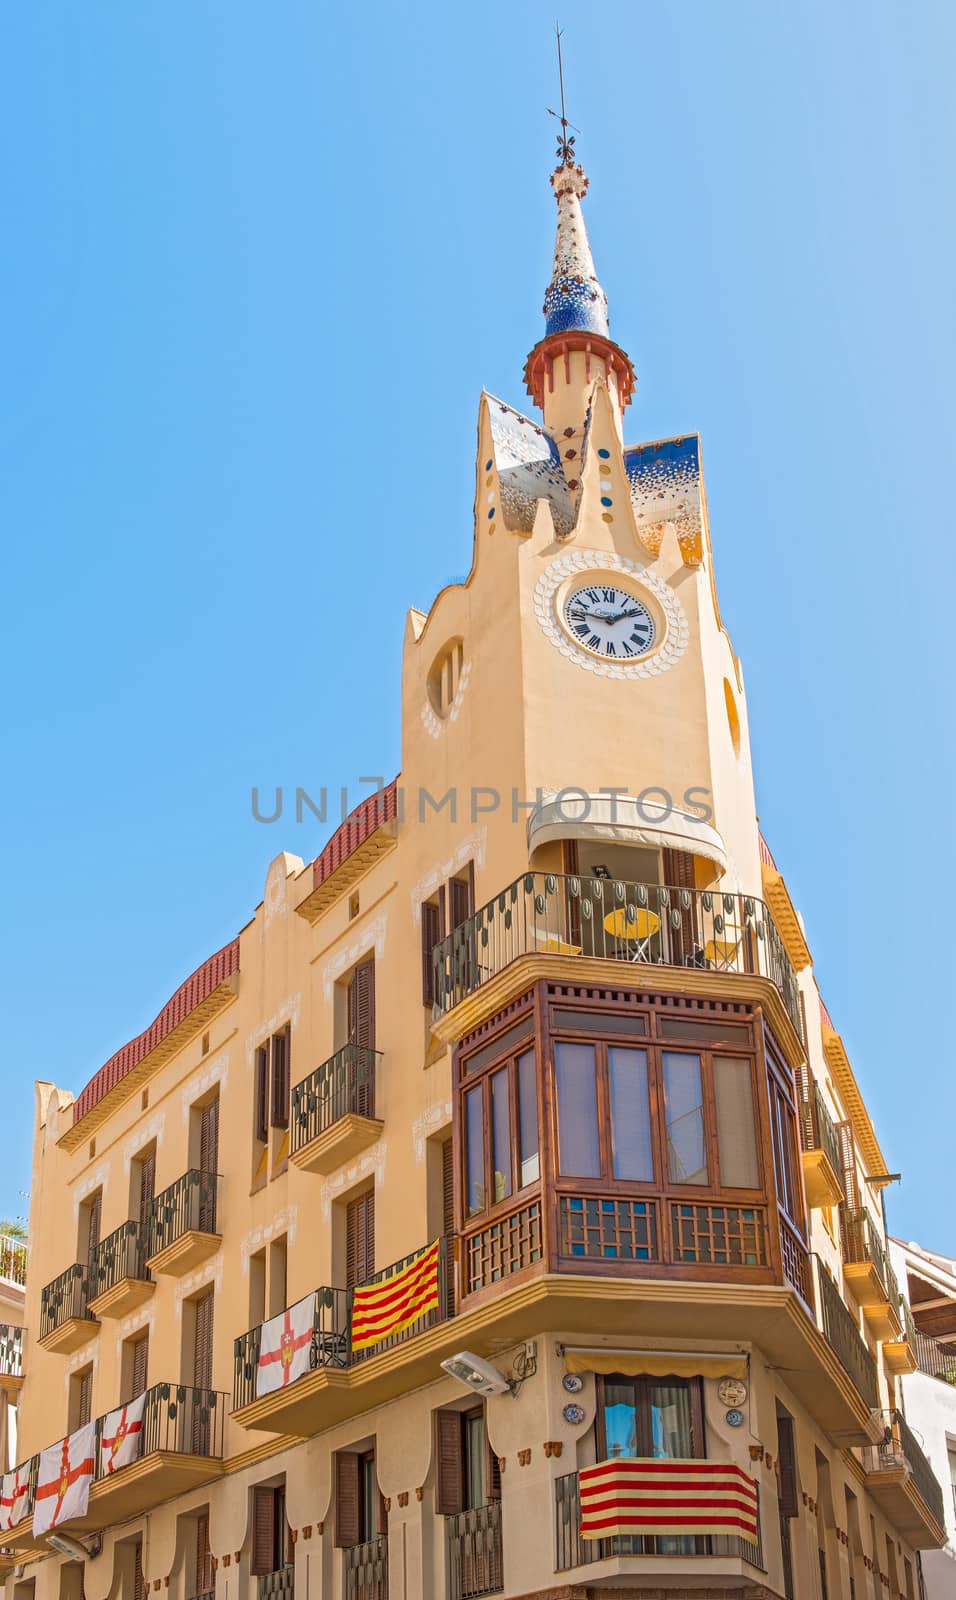 Sitges, Spain - September 21, 2013: View at old corner houses in Sitges, Spain. The town is major tourist place during the summer.